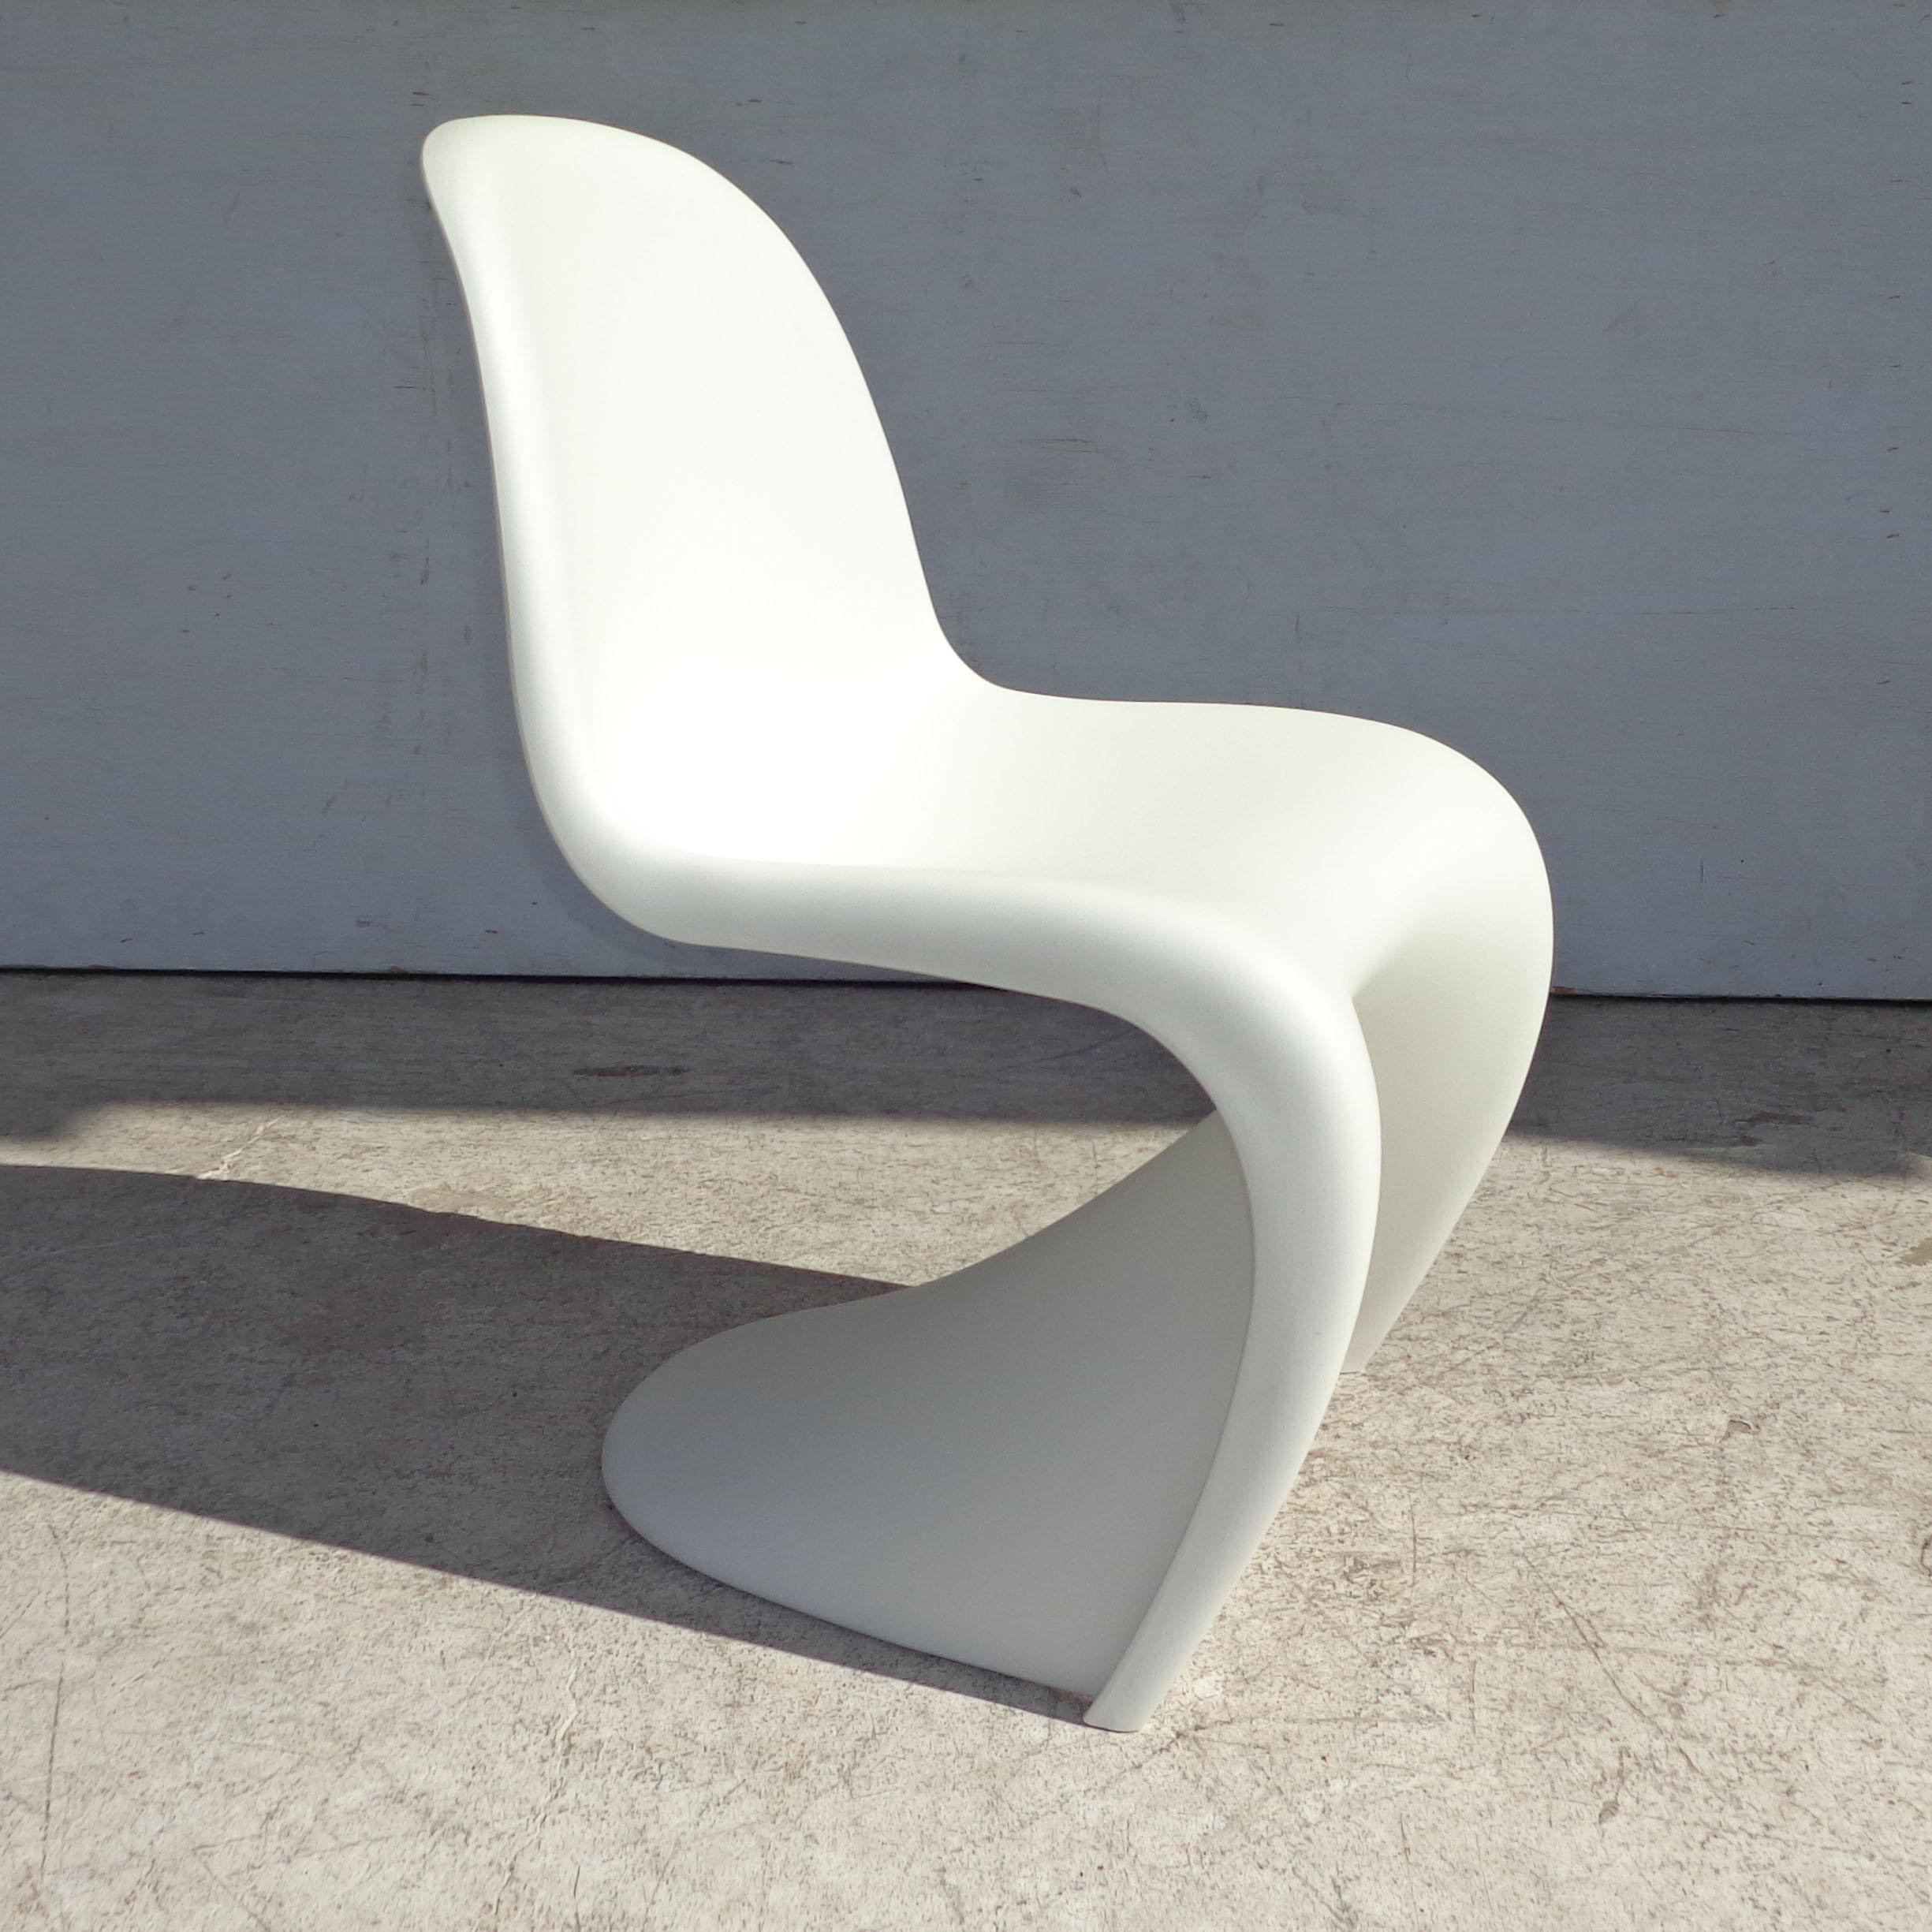 White Panton chair by Verner Panton for Vitra with Side Stool

Captivated by the potential of plastic, Danish designer Verner Panton created the first single-form injection-molded chair, which was originally manufactured by Vitra for Herman Miller